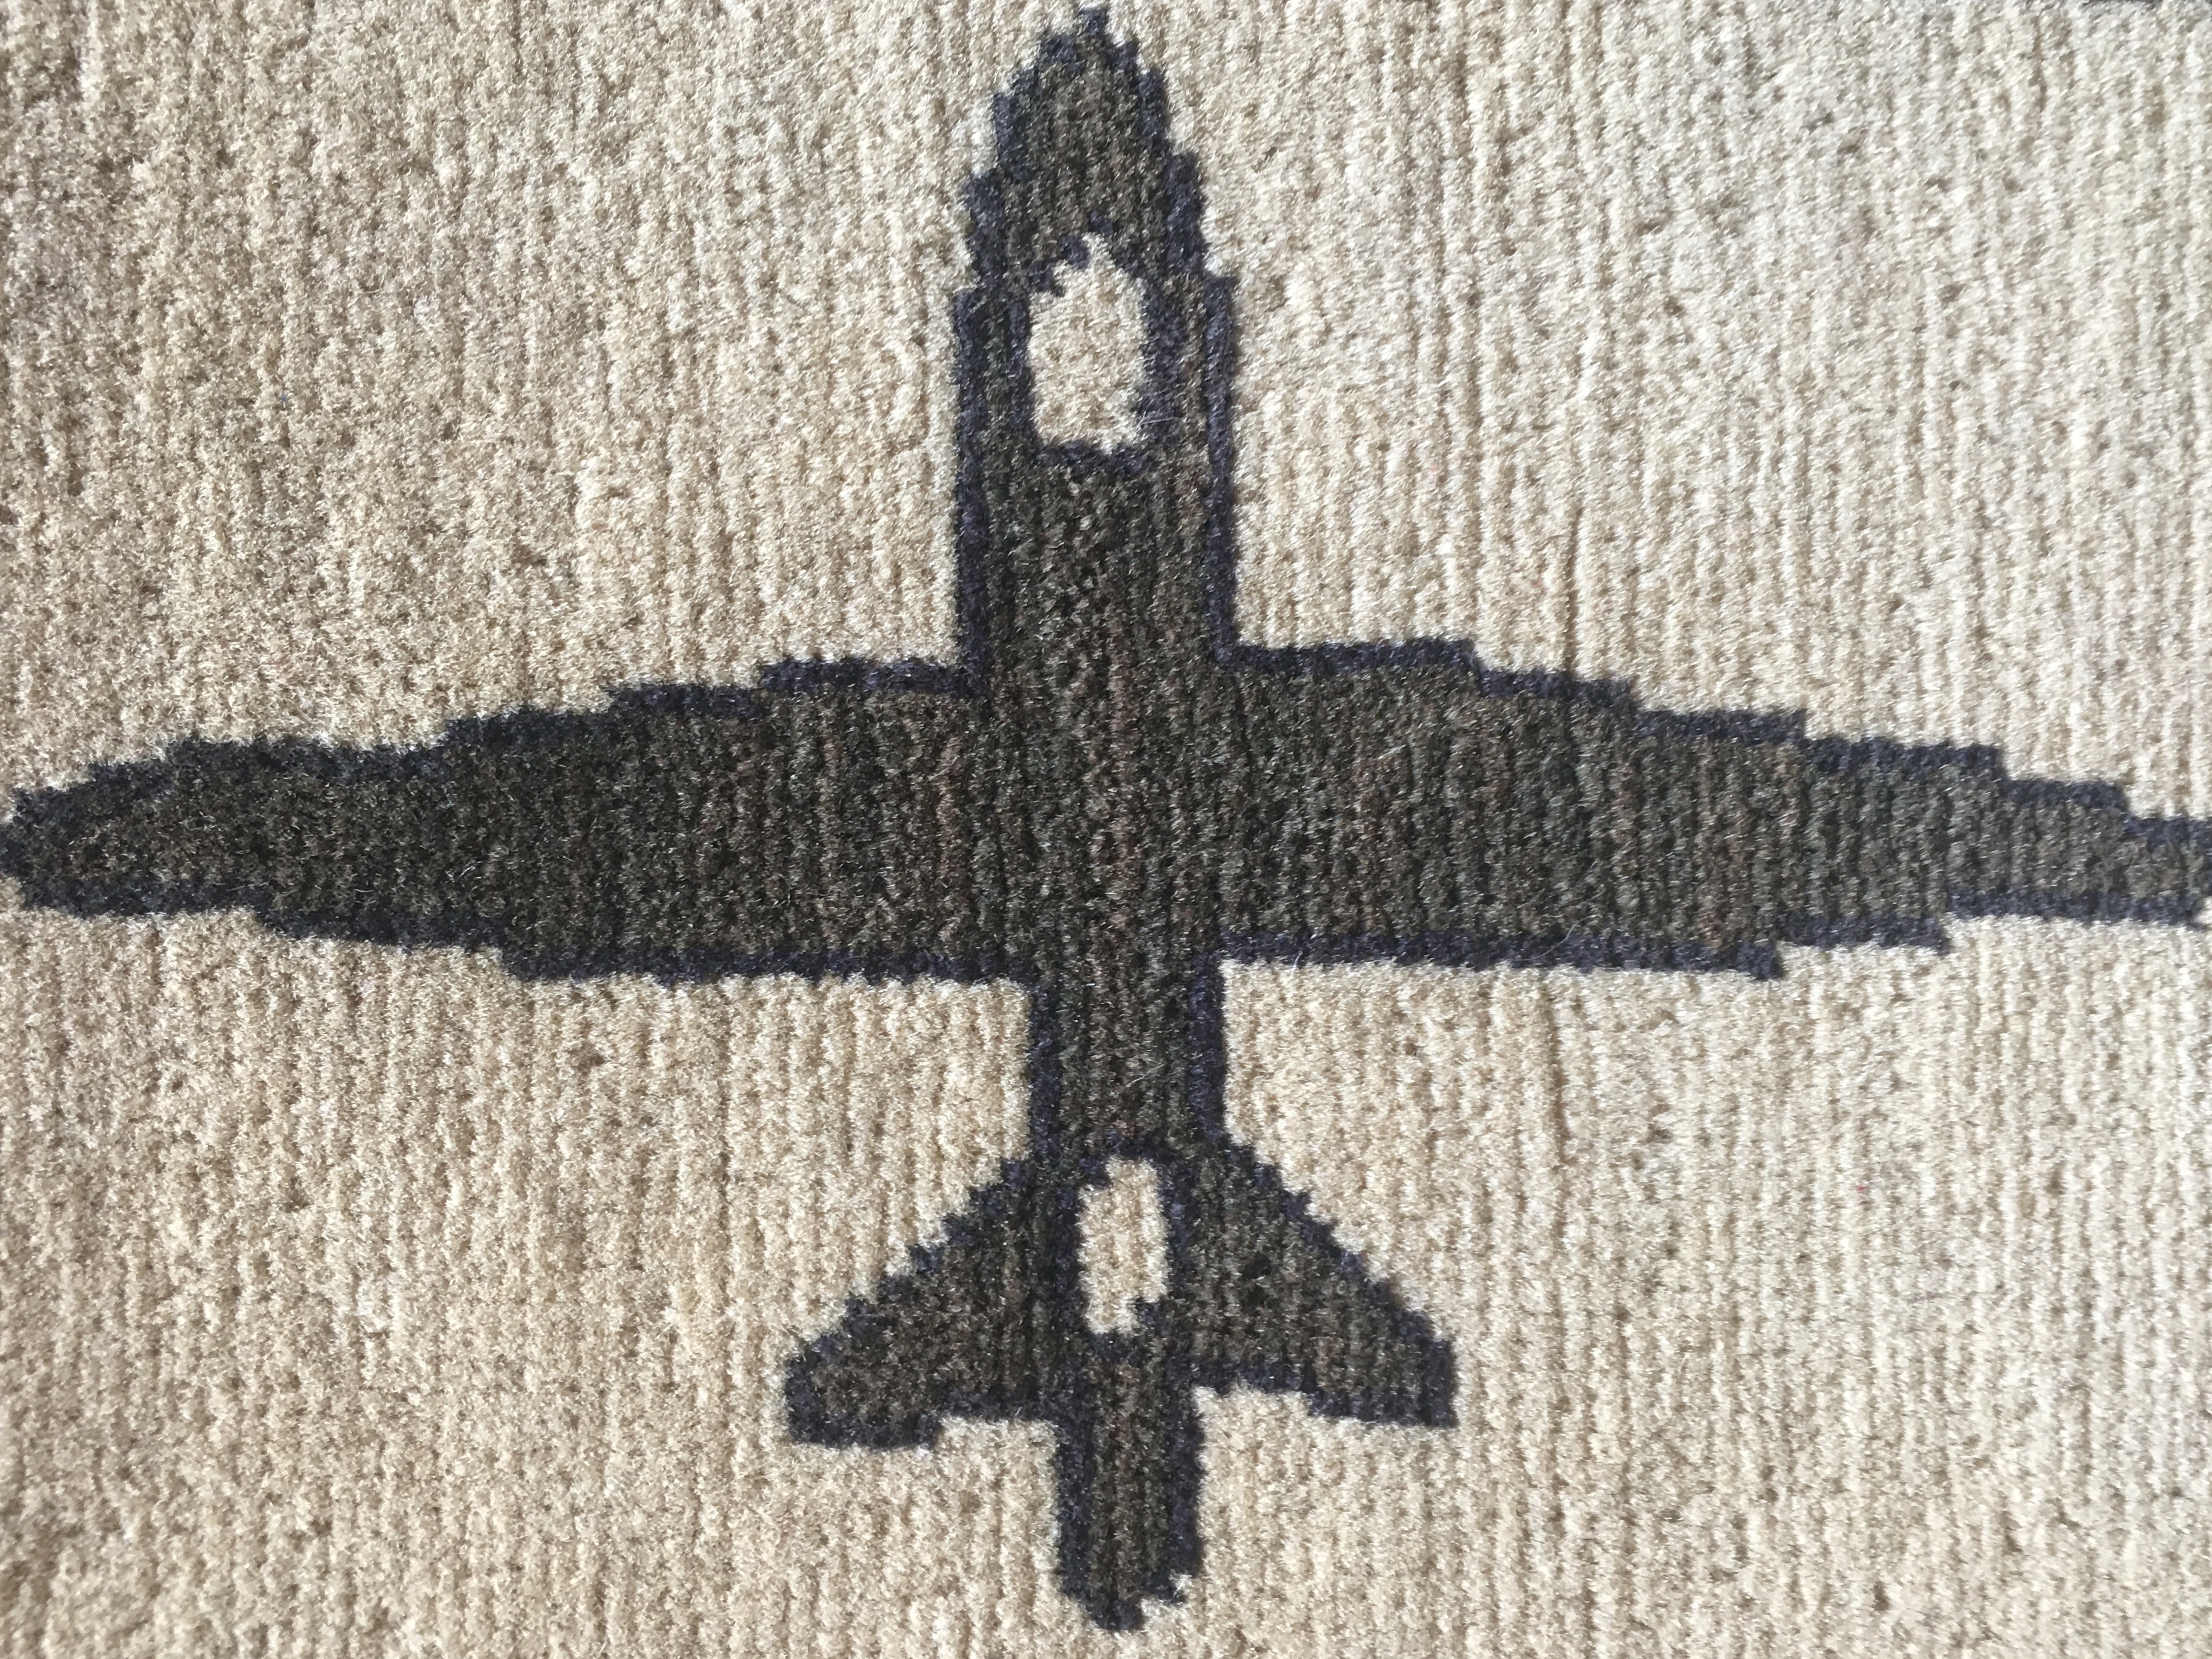 A detail of a bomber plane woven into a war rug